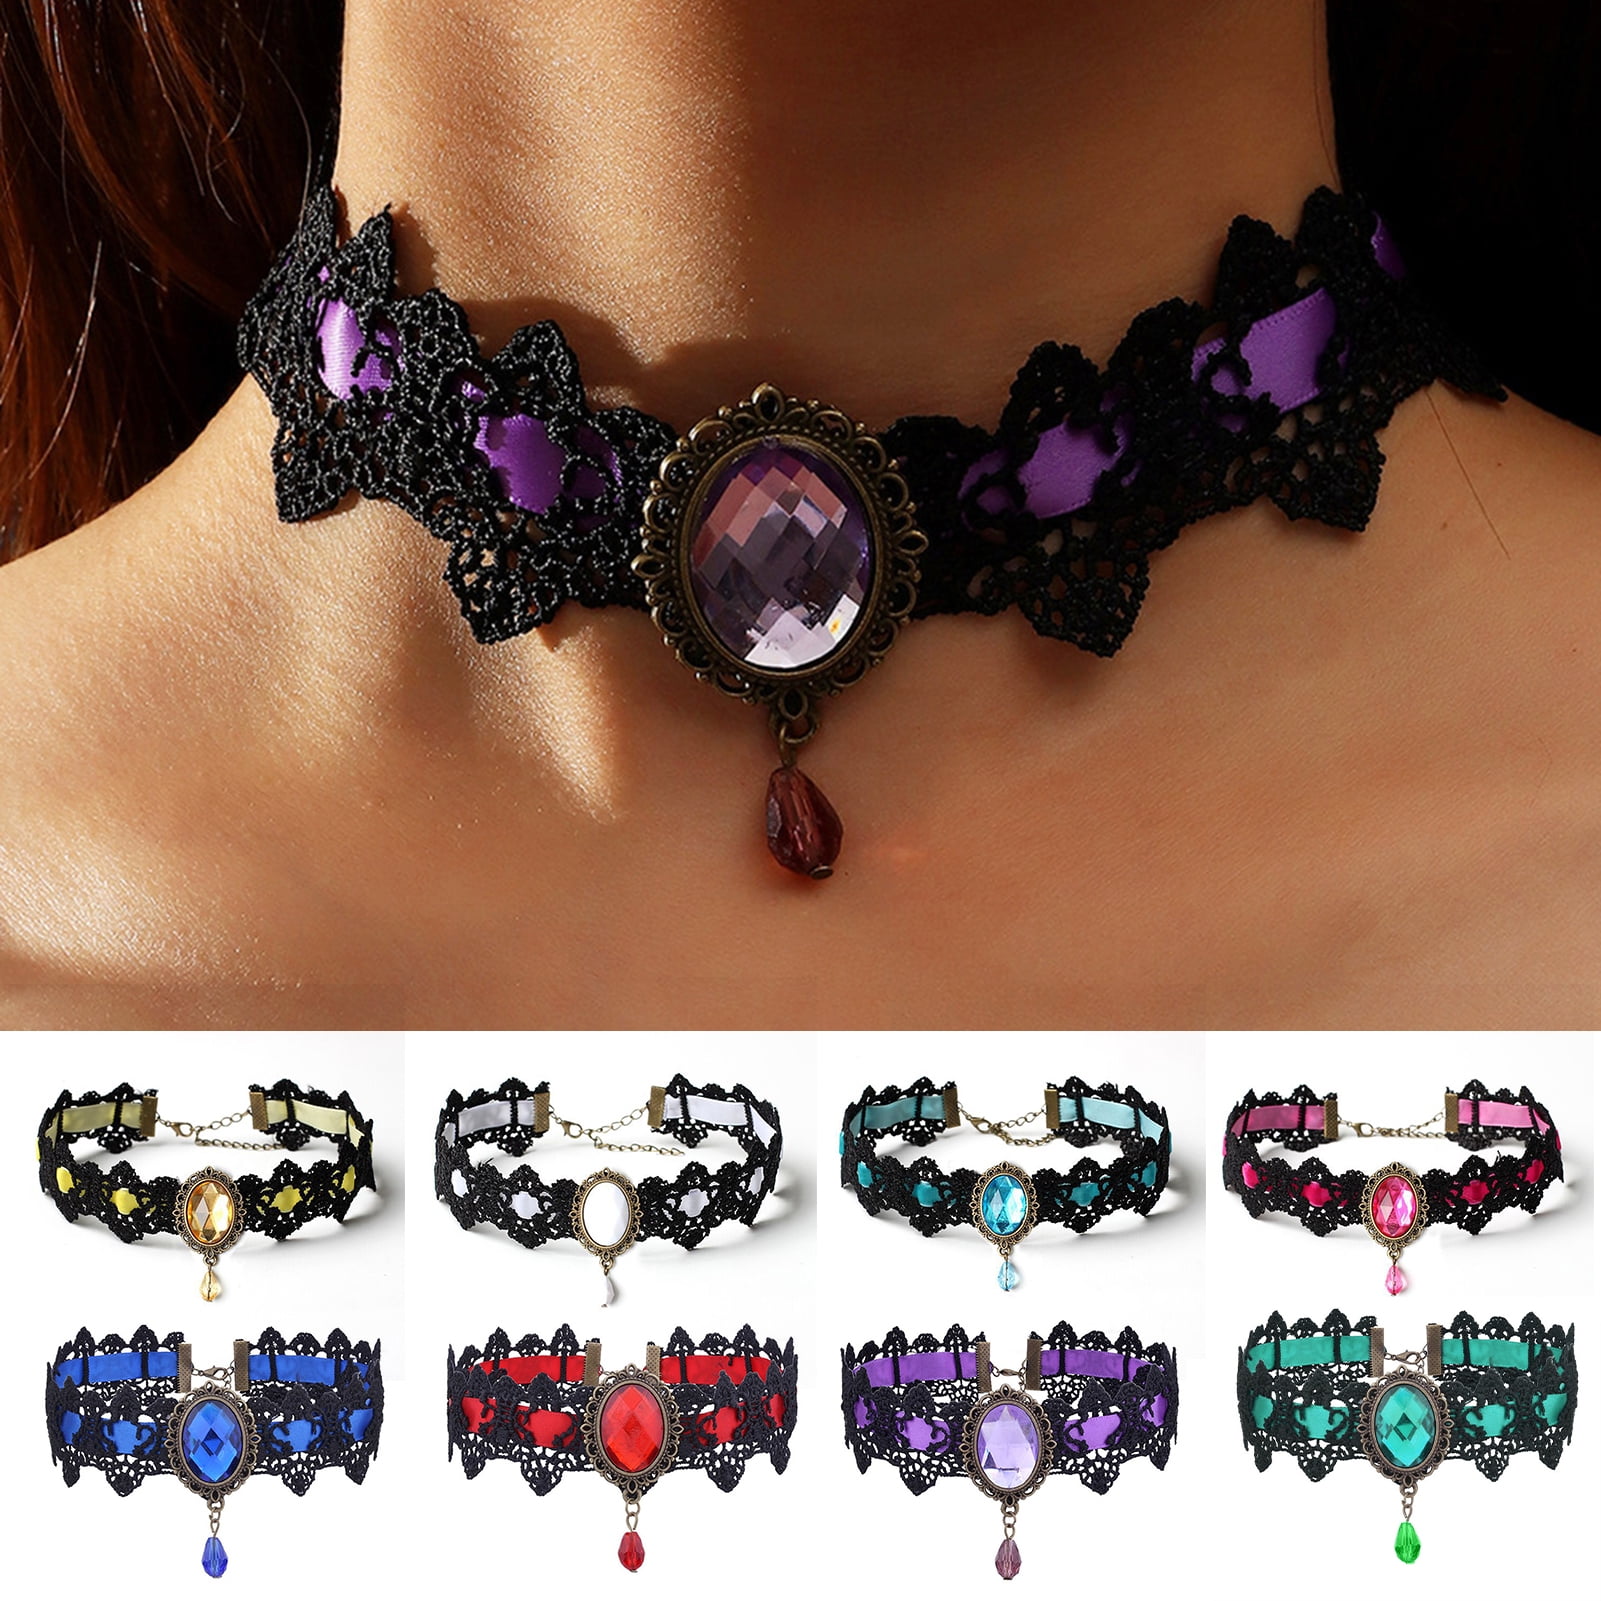 Black Rose Briar Choker Necklace by Alchemy Gothic